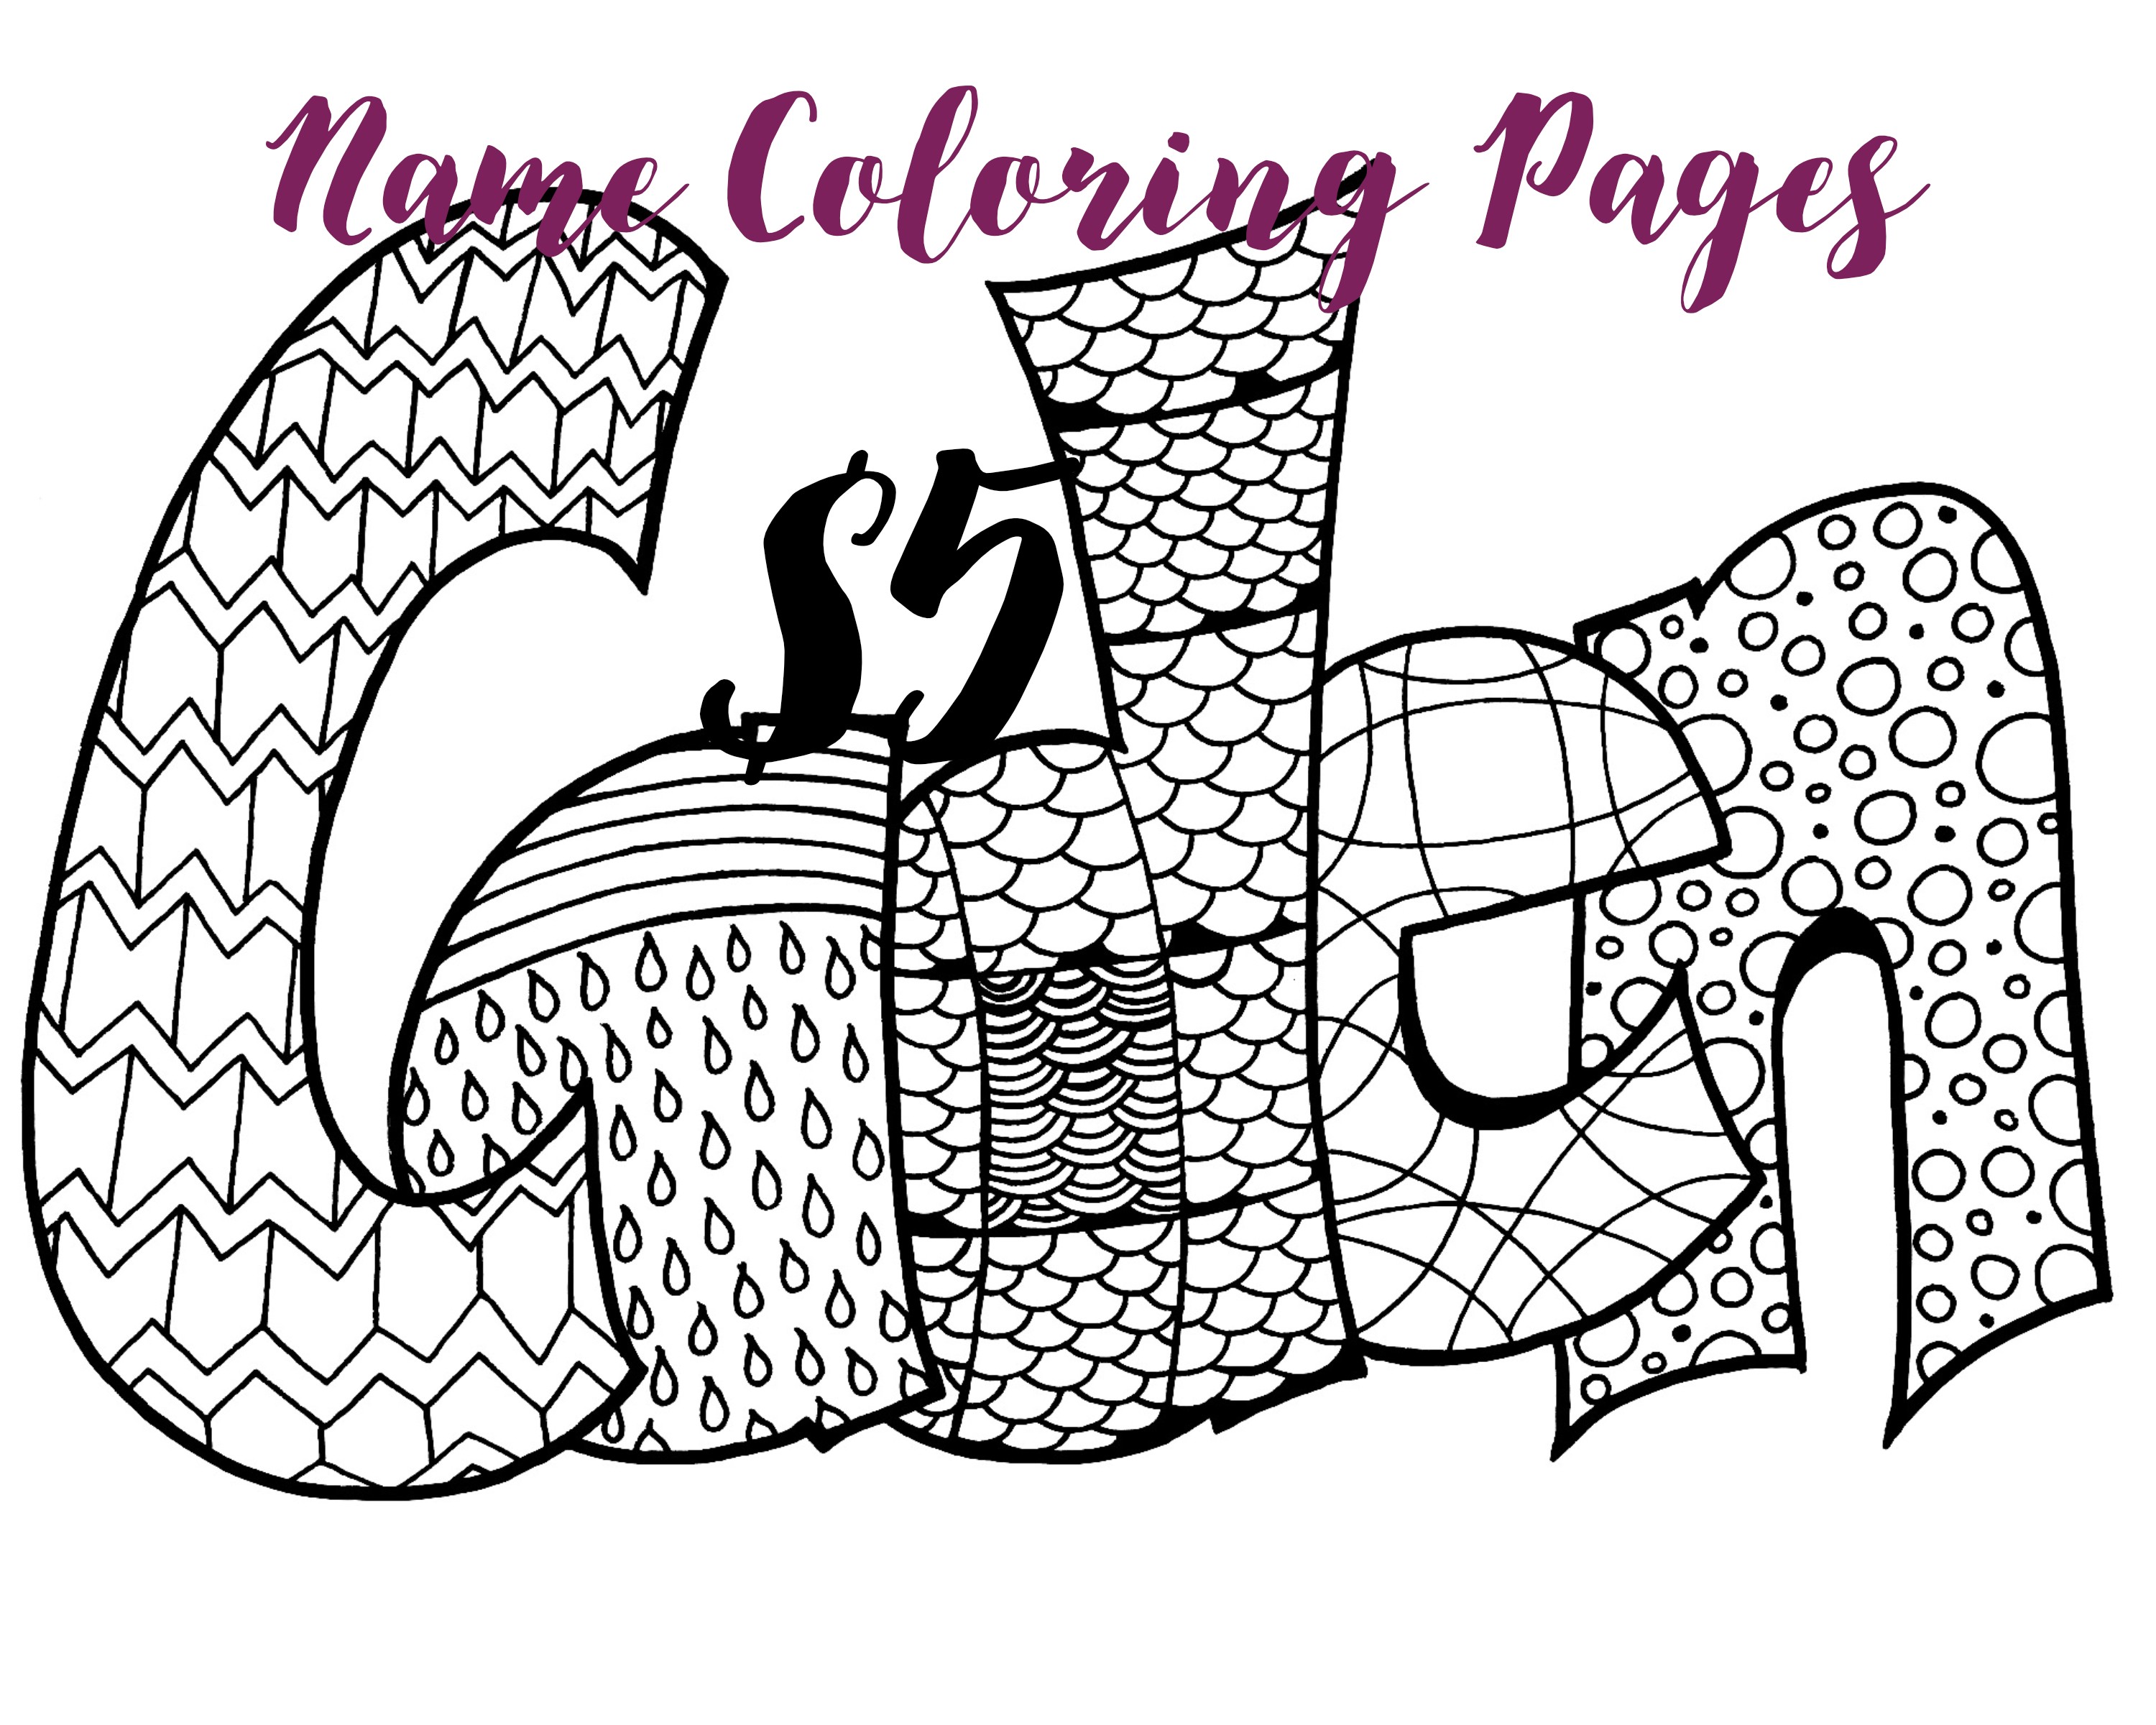 Personalized Name Coloring Pages at